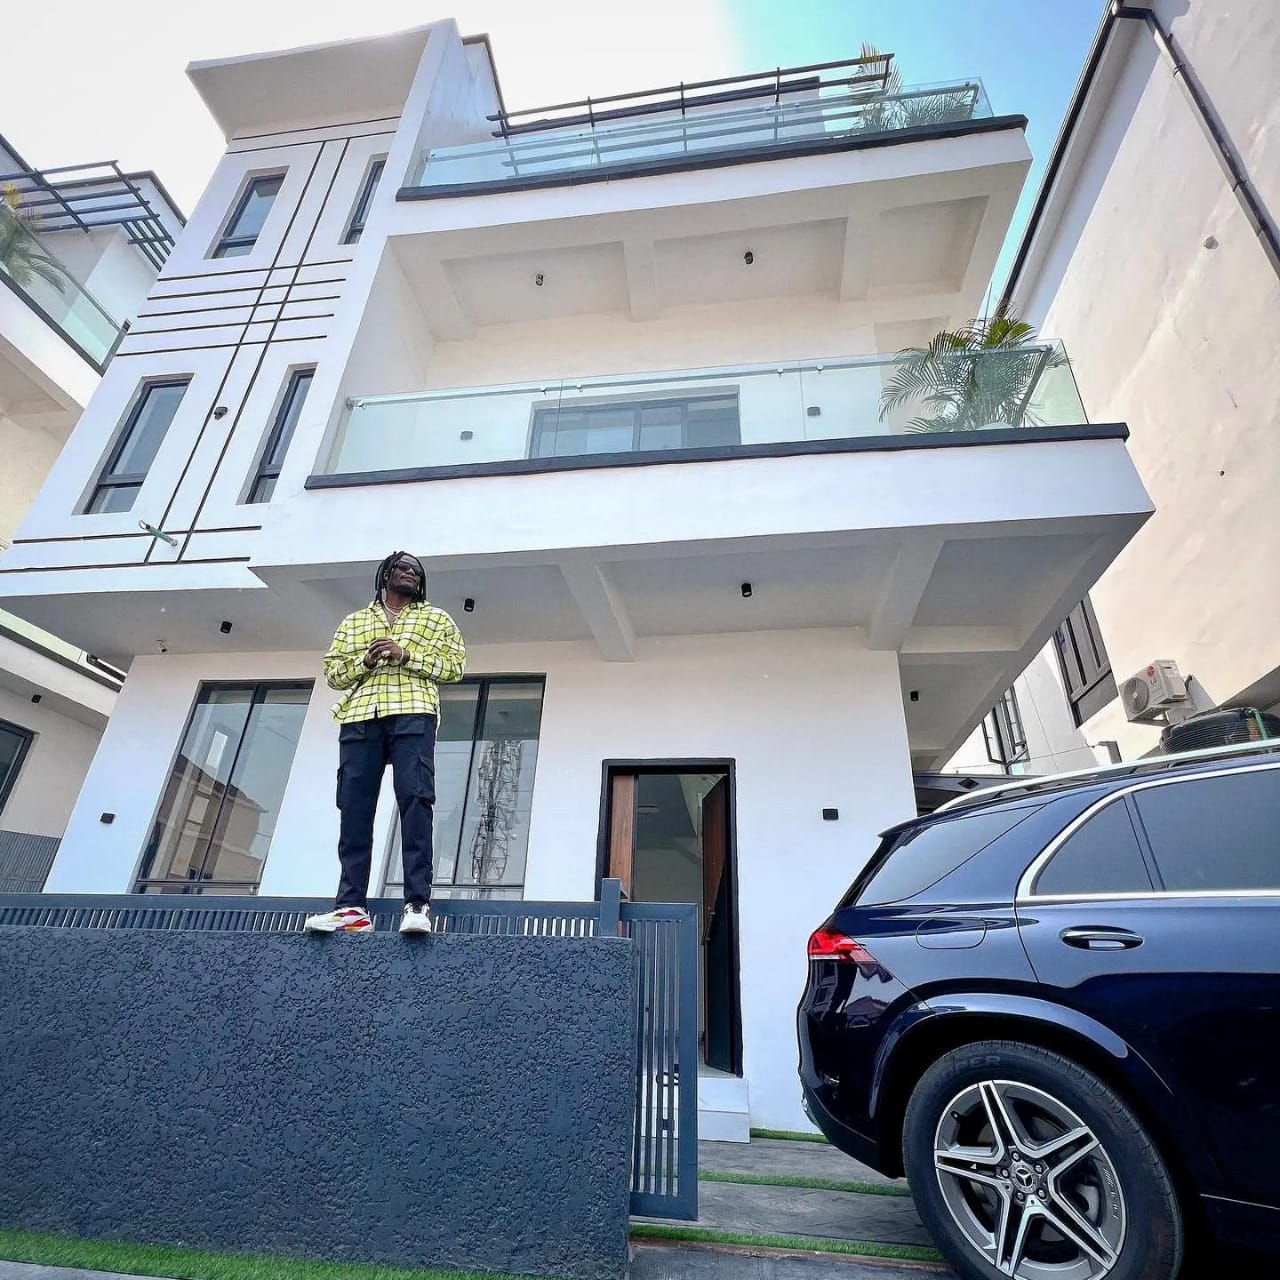 Music Producer Pheelz Acquires New Mansion And Suv 